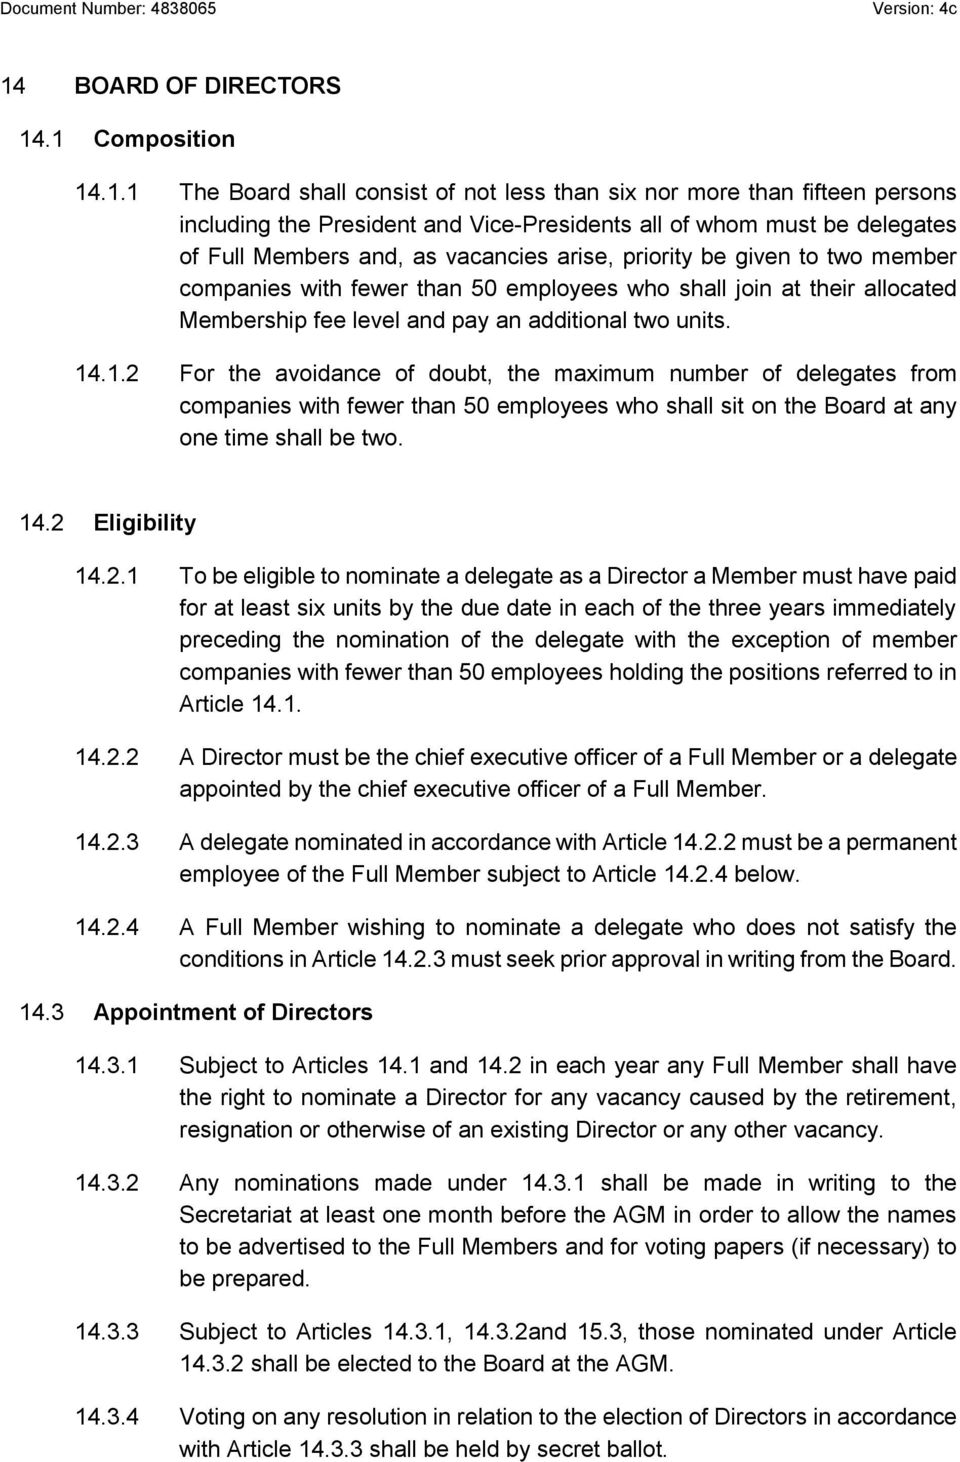 1.2 For the avoidance of doubt, the maximum number of delegates from companies with fewer than 50 employees who shall sit on the Board at any one time shall be two. 14.2 Eligibility 14.2.1 To be